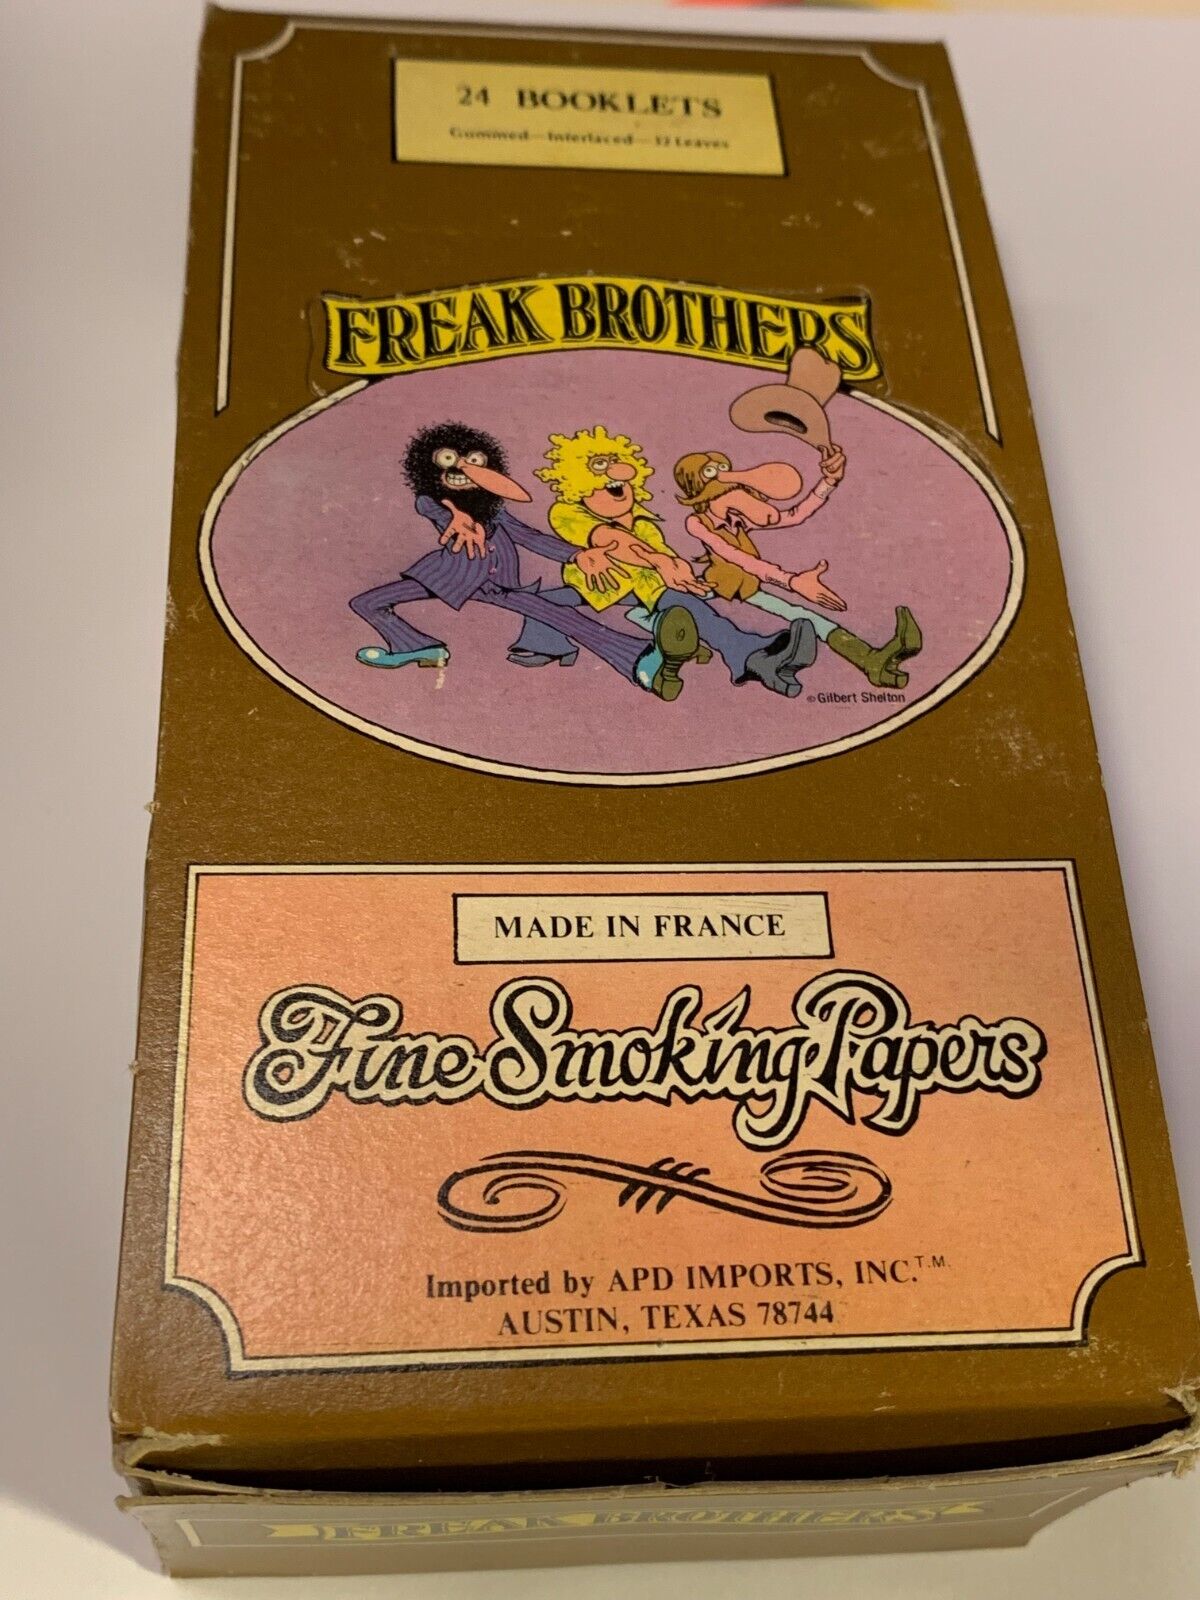 FREAK BROTHERS VINTAGE CIGARETTE ROLLING PAPERS STORED FRESH & DRY BOX/24